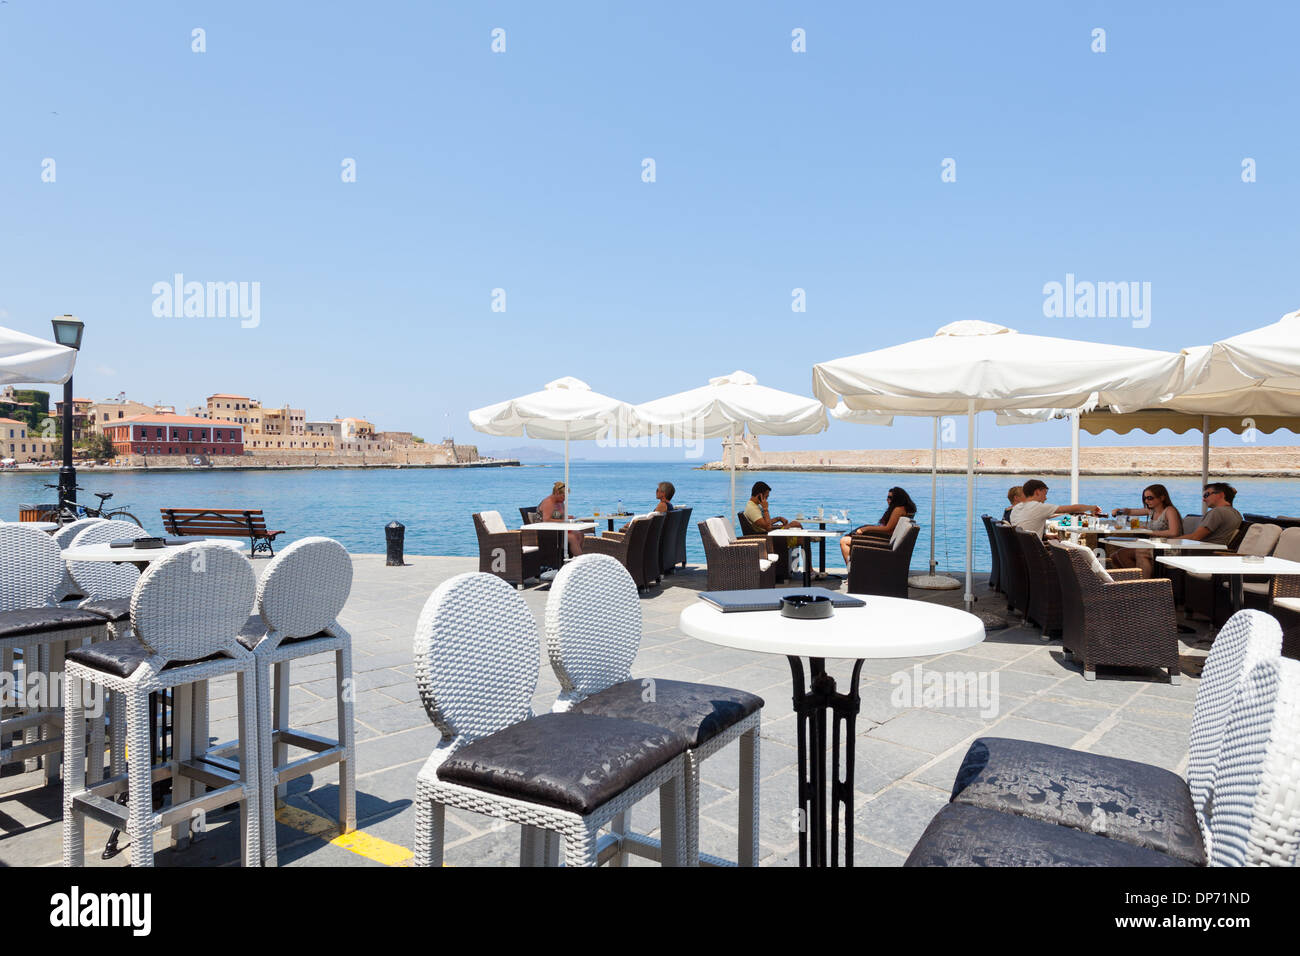 People enjoying in a restaurant cafe pub at the ancient Venetian harbor of Chania, Crete Island, Greece Stock Photo